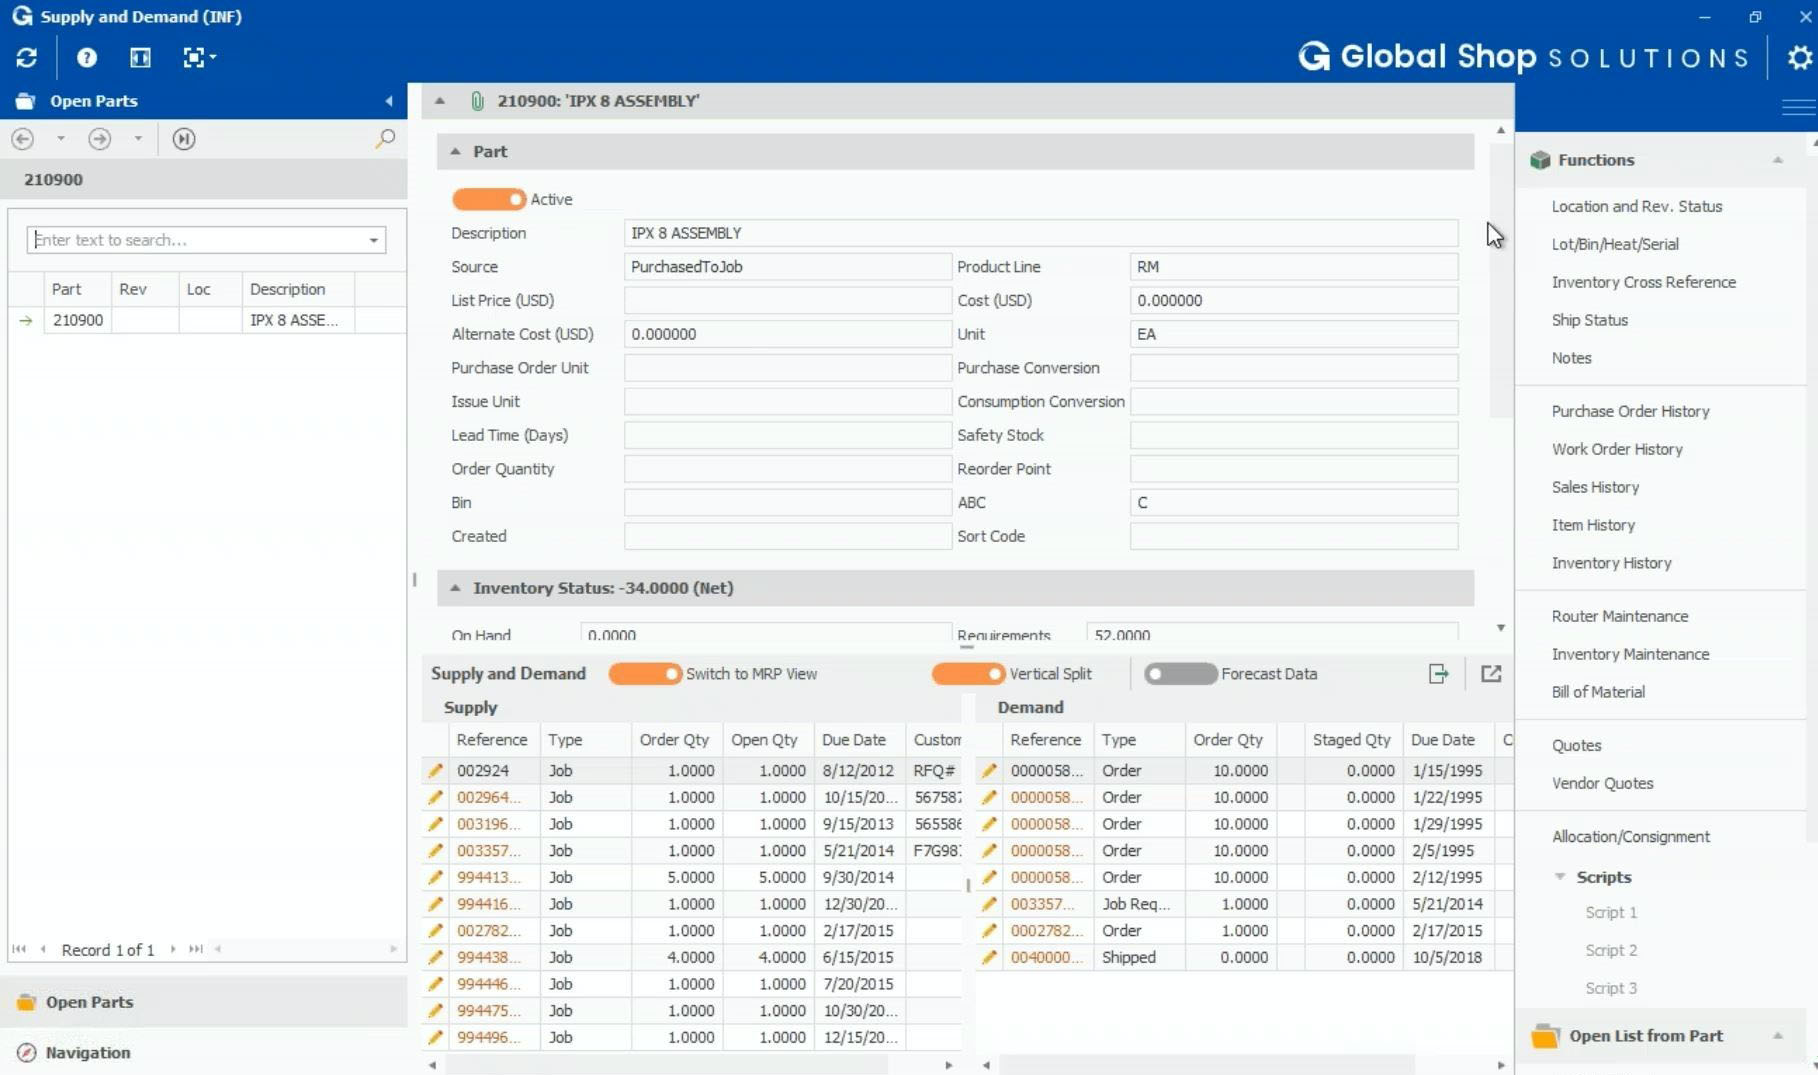 Global Shop Solutions Software - Global Shop Solutions Supply & Demand Screen